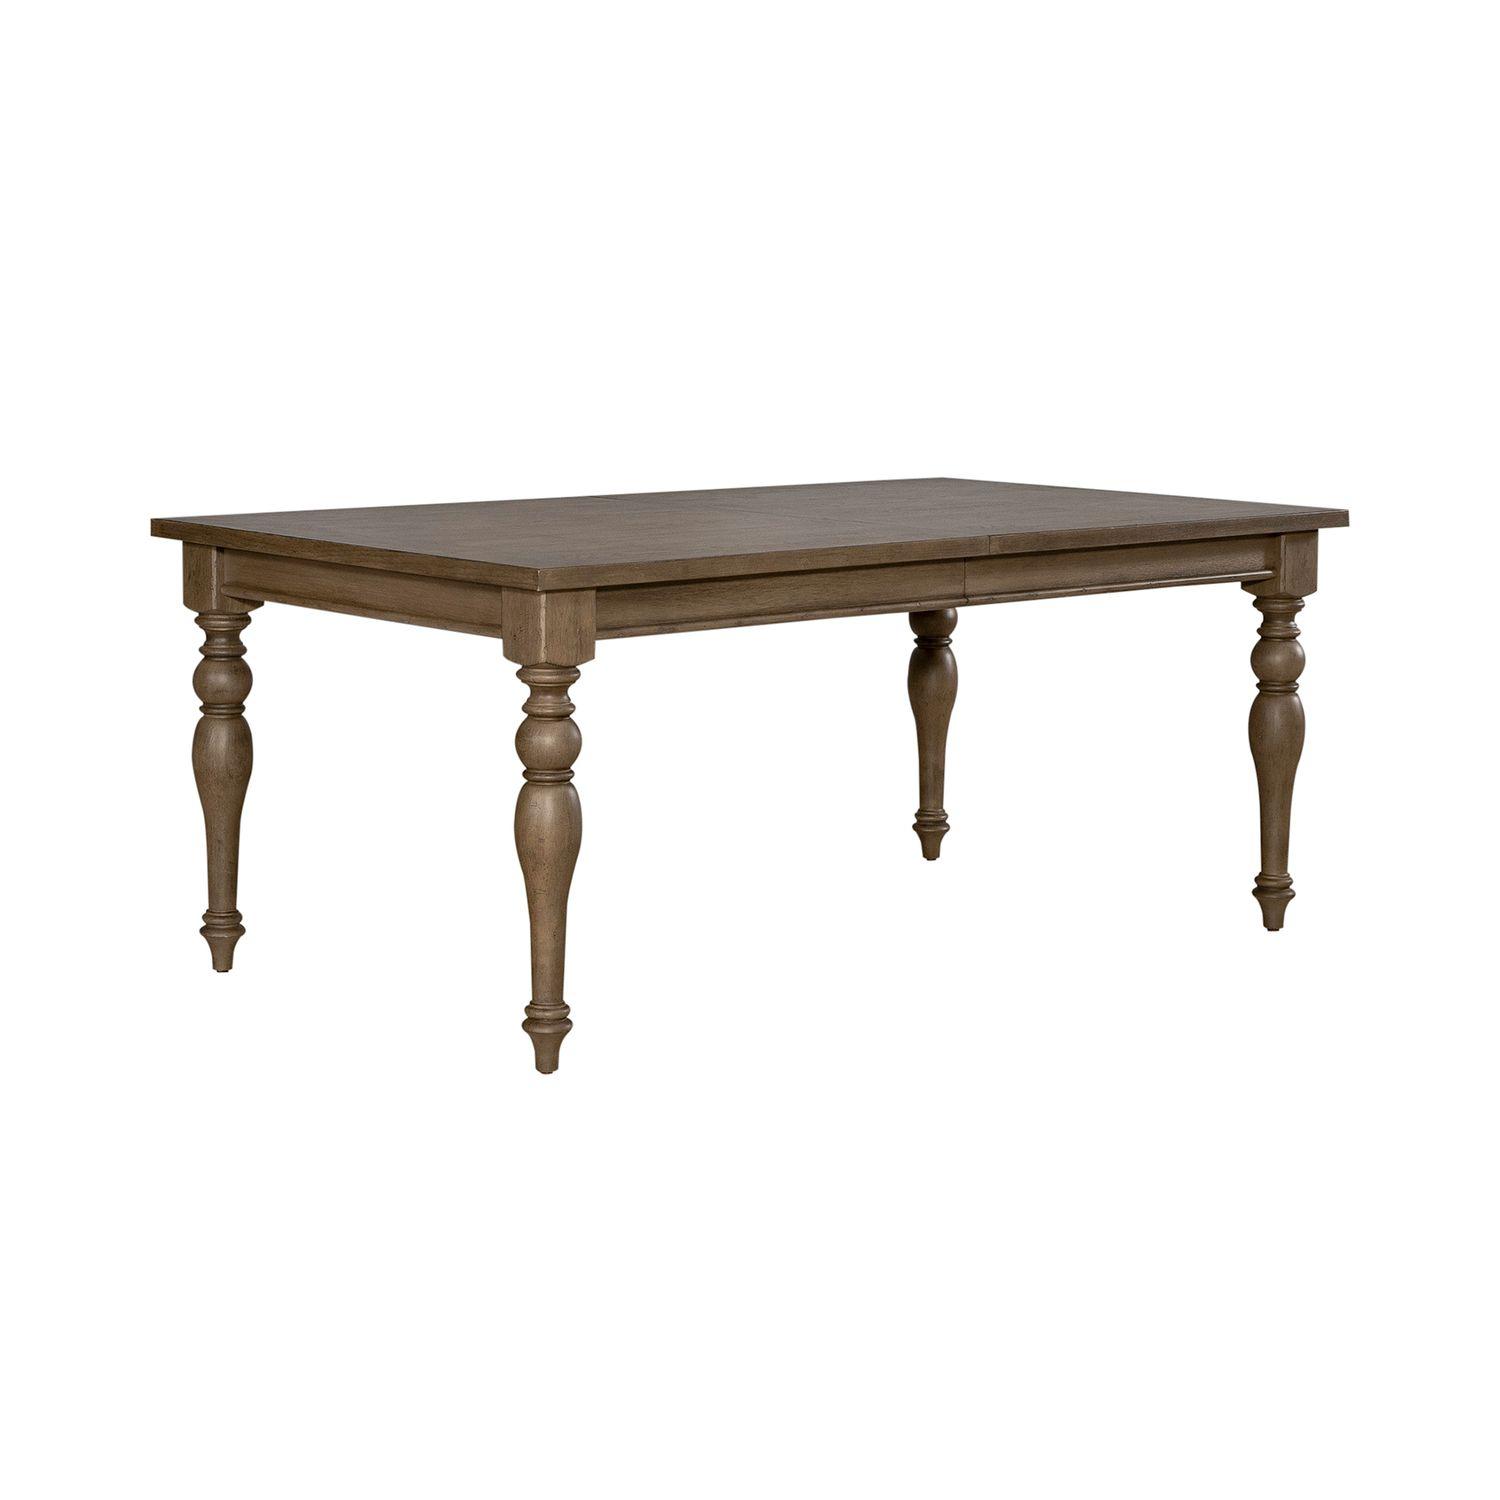 Transitional Dining Table Americana Farmhouse (615-DR) 615-T4290 in Taupe, Black 